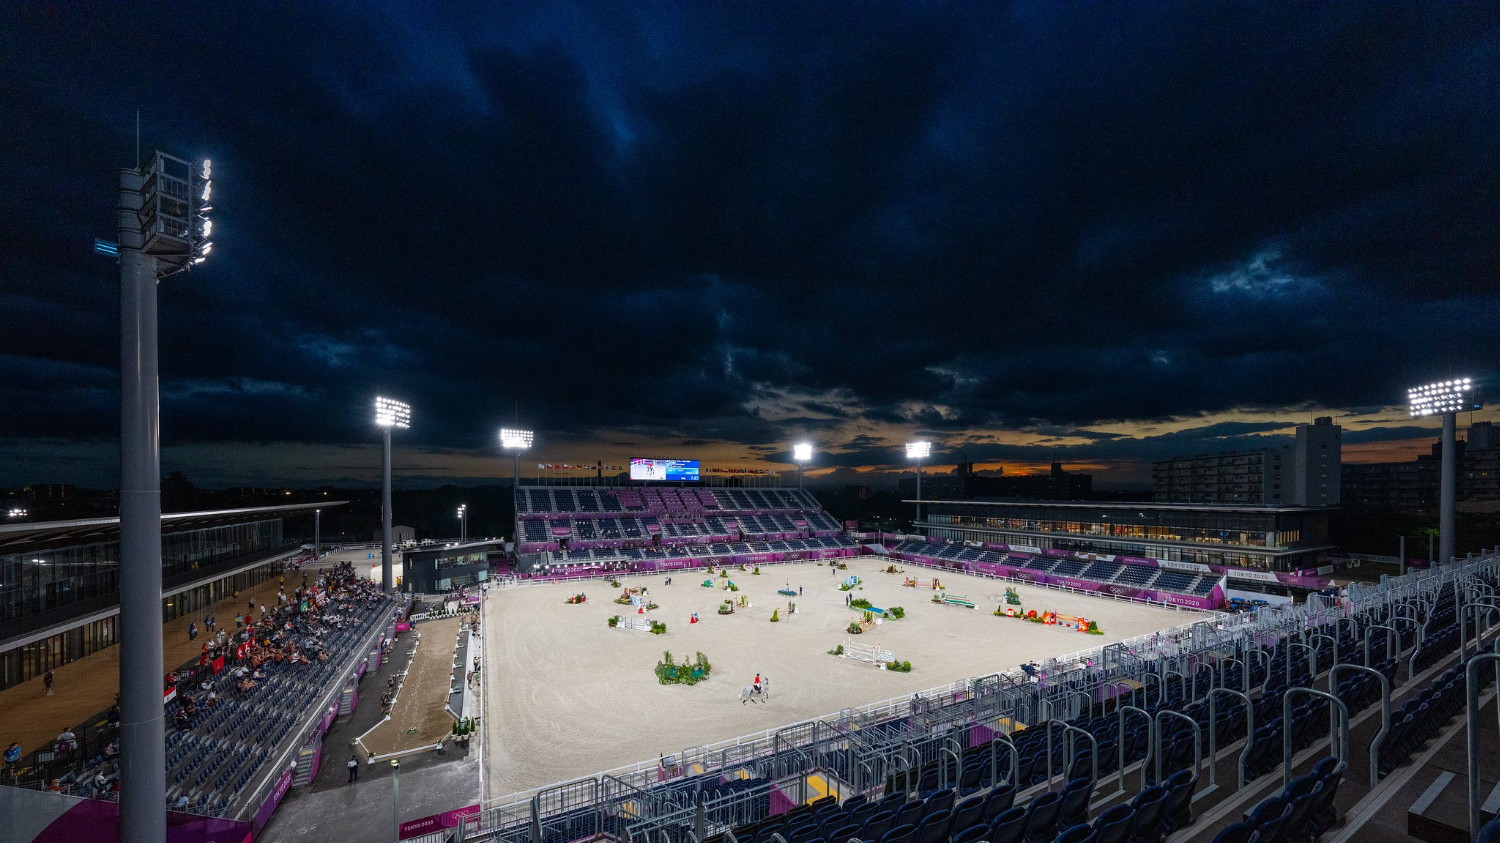 Olympics and show jumping: Formula needs to be reviewed

